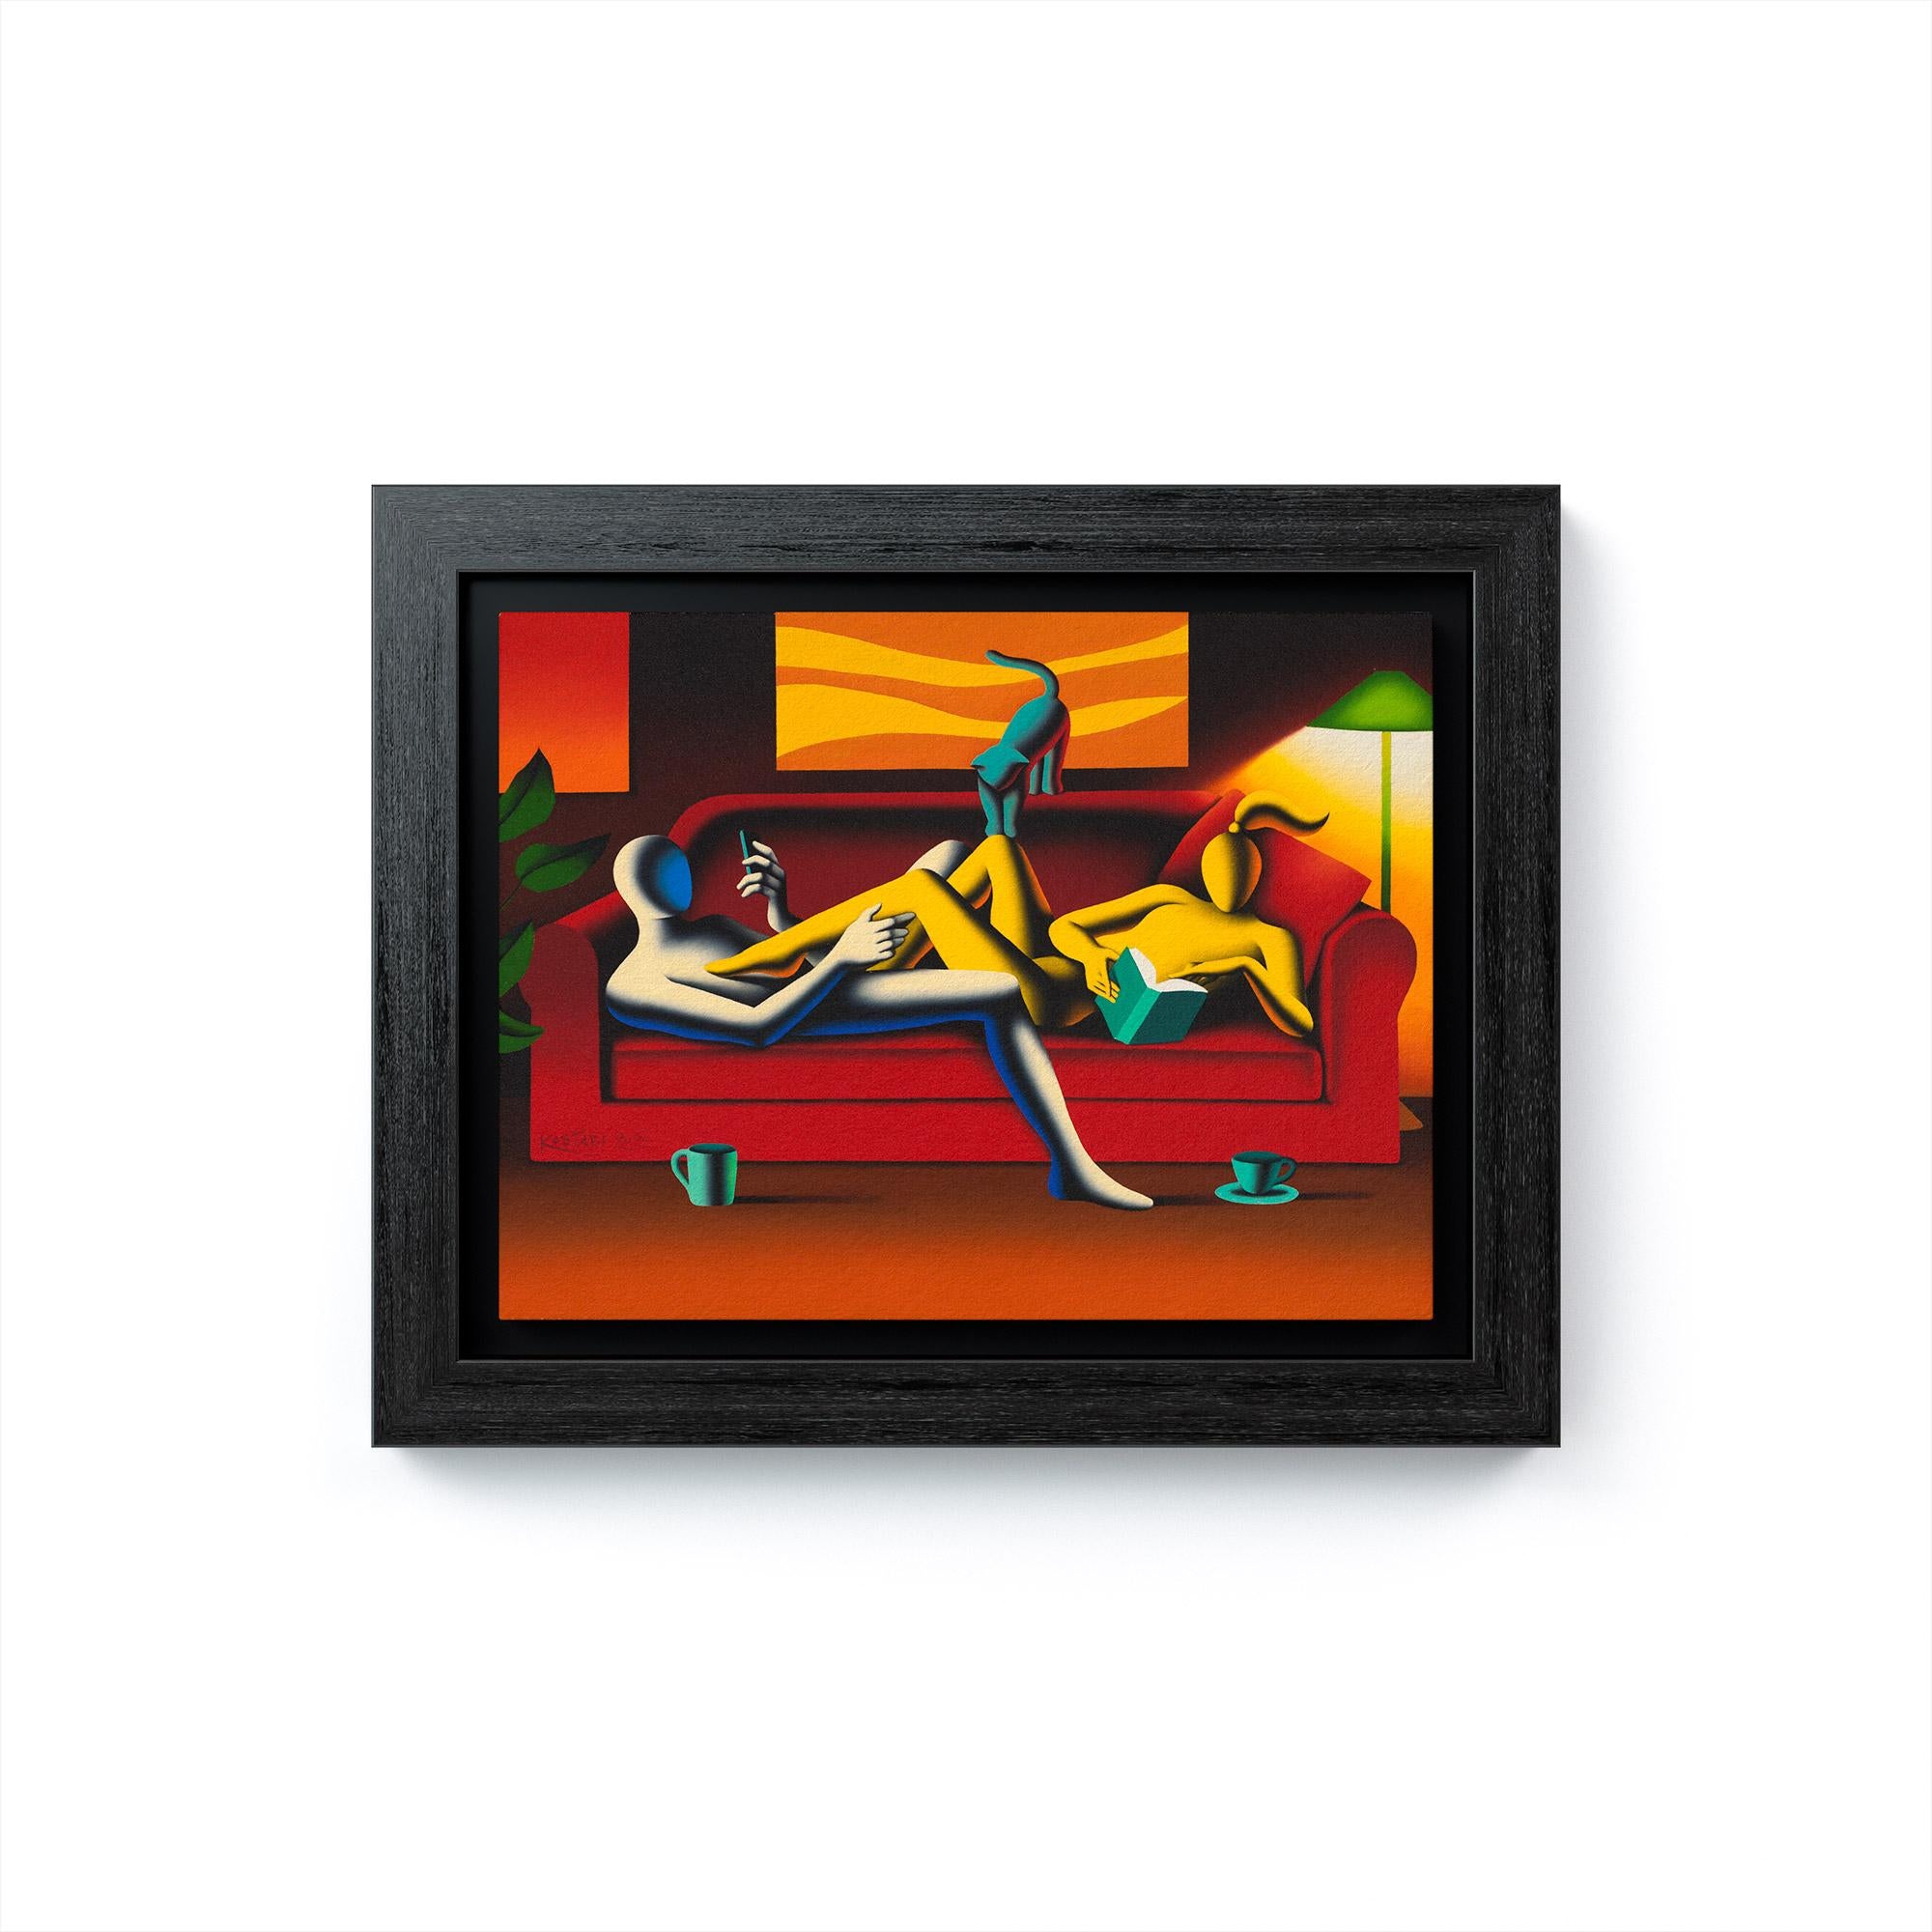 Golden is the Twilight of Memory - Painting by Mark Kostabi